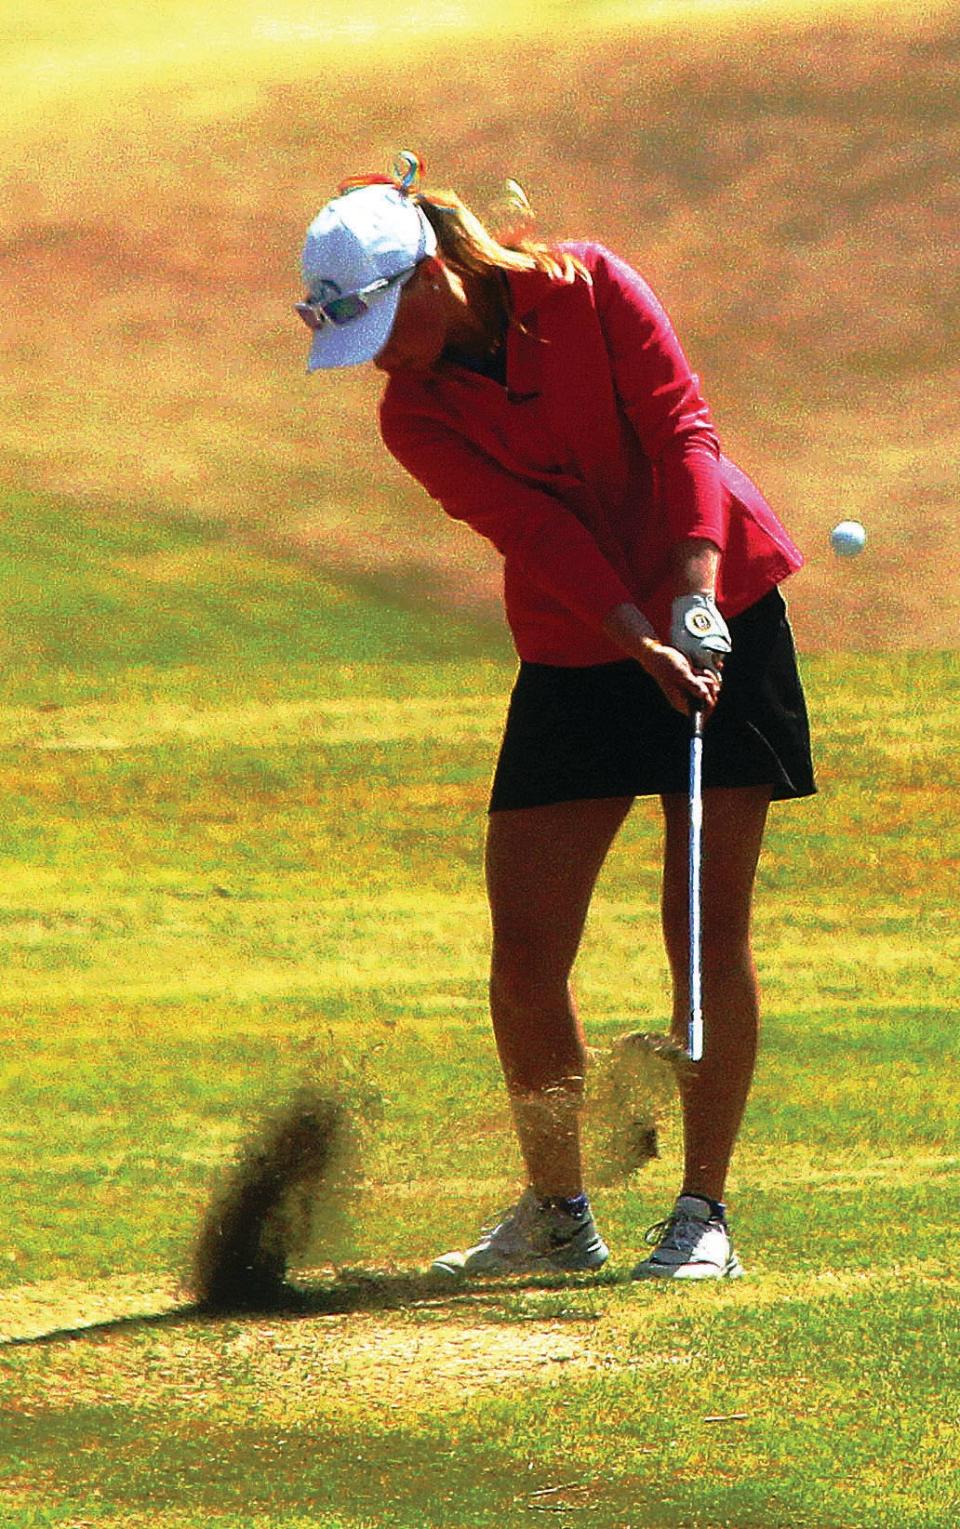 Emma Shelley boosted Bartlesville High School golf with her fiery game, which led to a college opportunity at the University of Central Oklahoma.